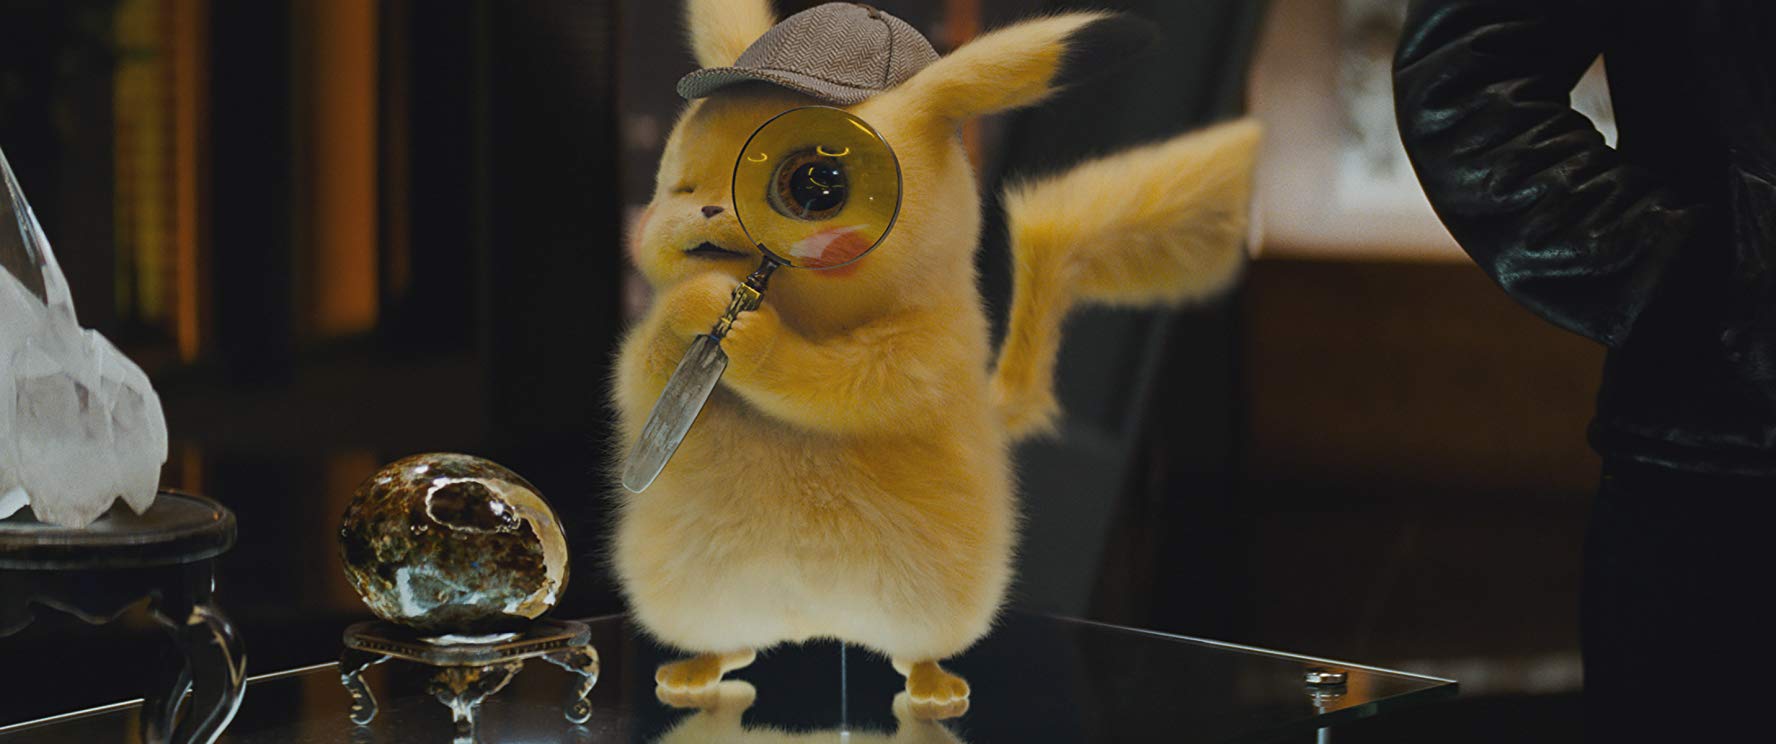 Read more about the article ‘Pokémon Detective Pikachu’ review: Cute and fun, even though it makes no sense